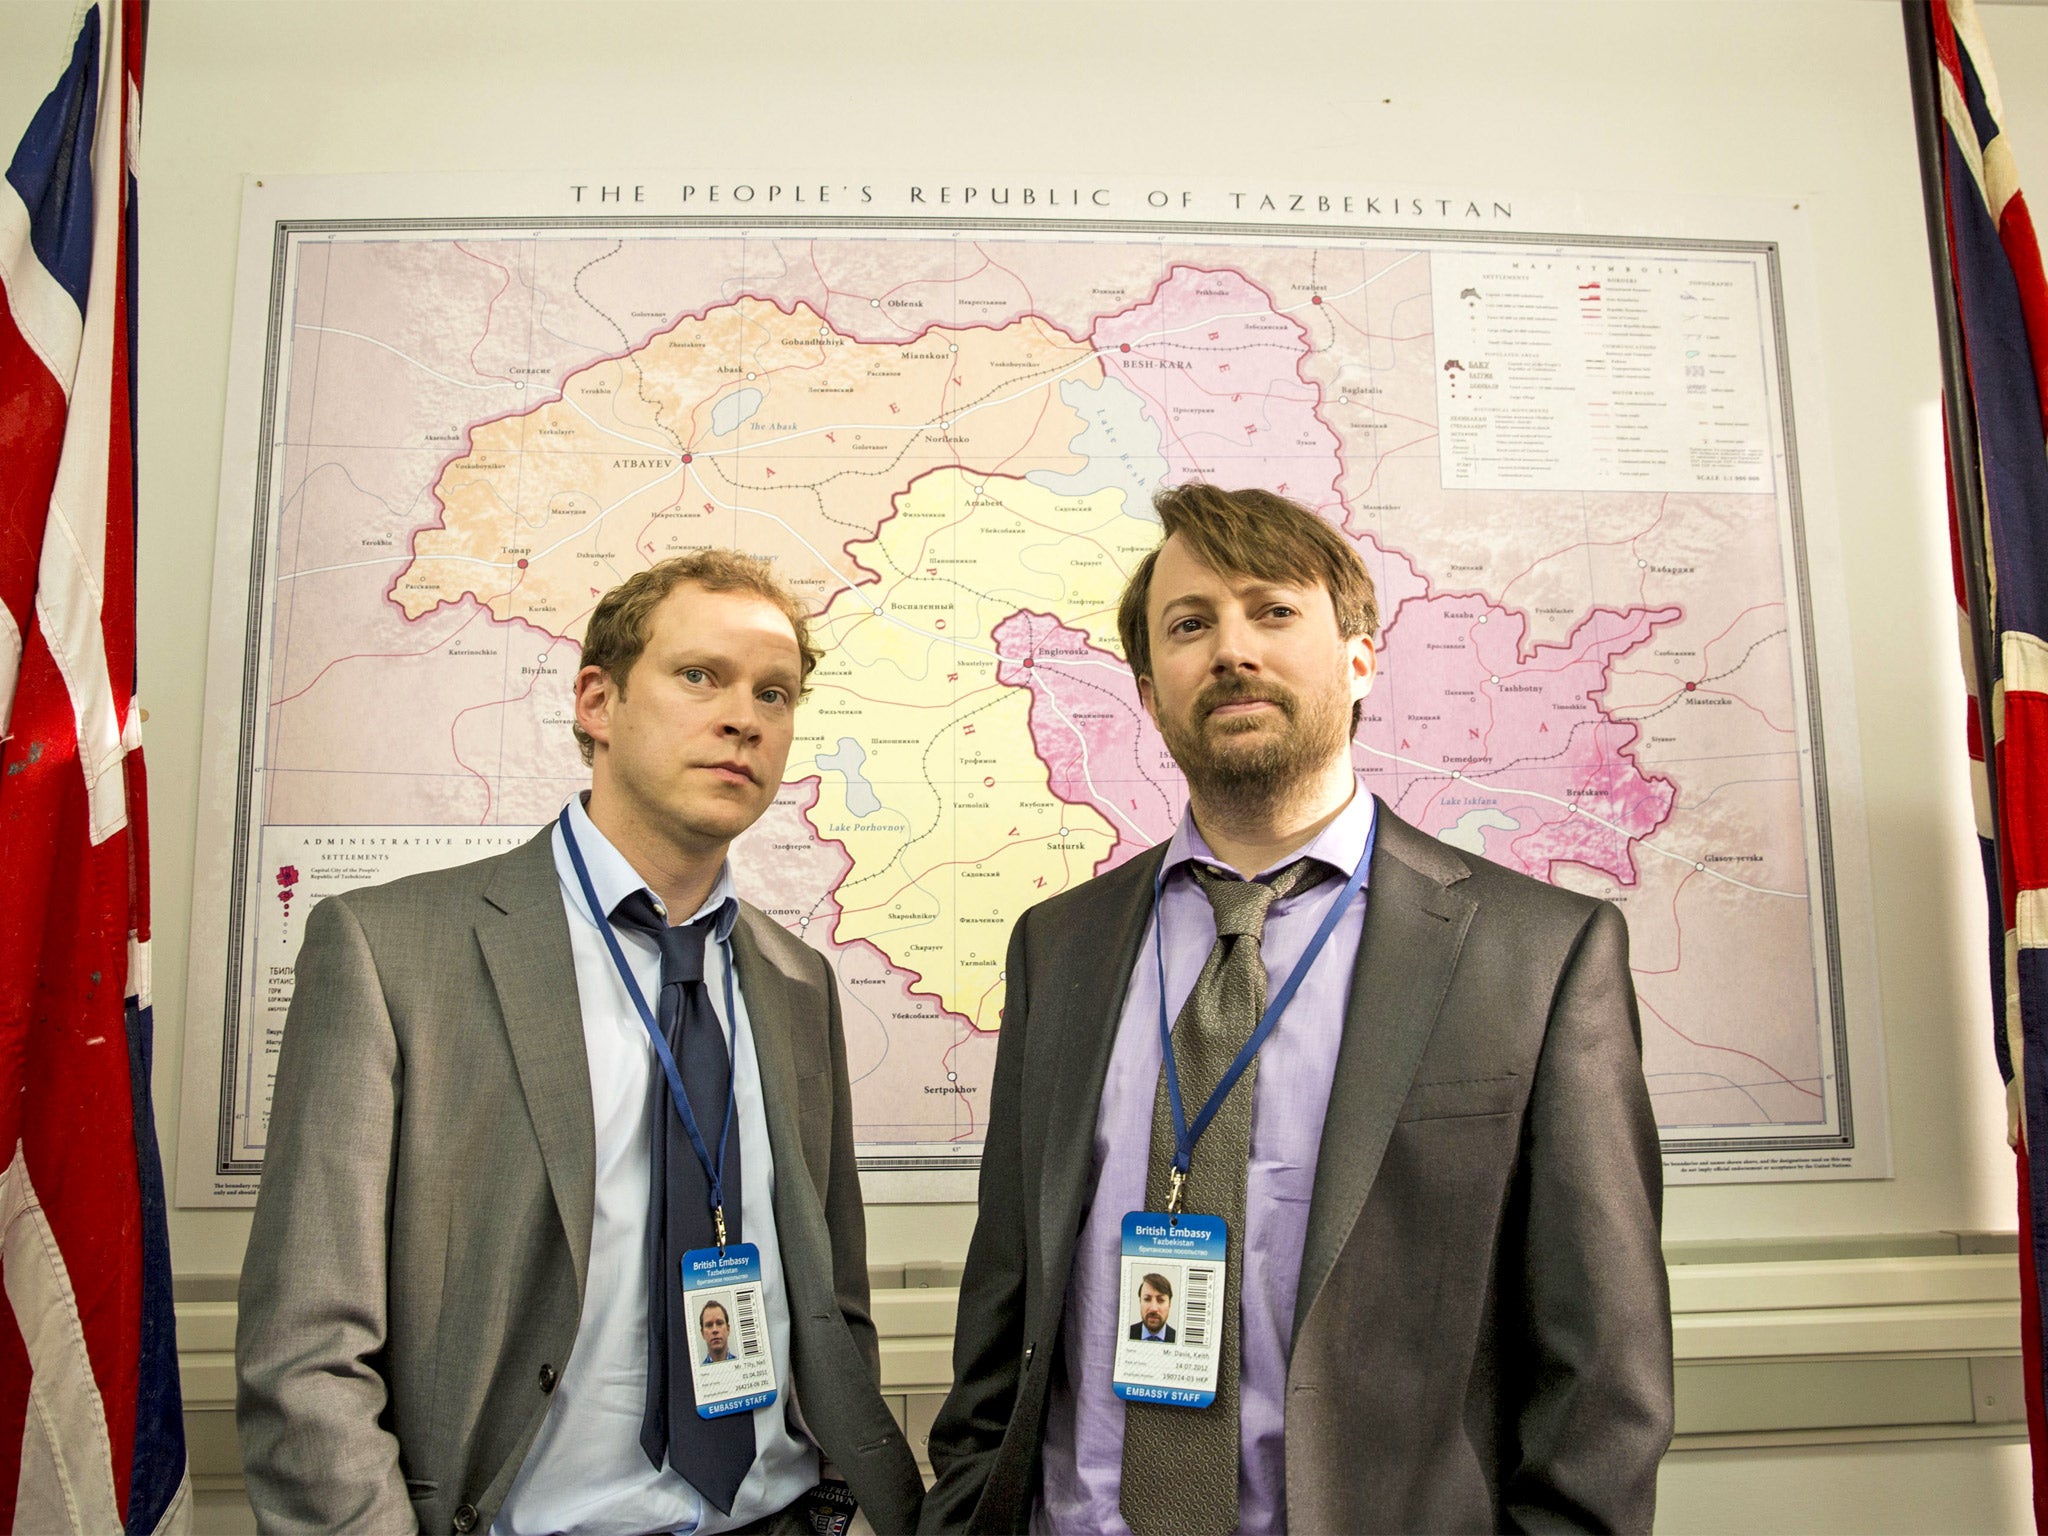 In the recent BBC sitcom ‘Ambassadors’, starring Robert Webb and David Mitchell as Britain’s representatives in the fictional Republic of Tazbekistan, Mitchell (right, with Webb) needed lessons in the Tazbek language